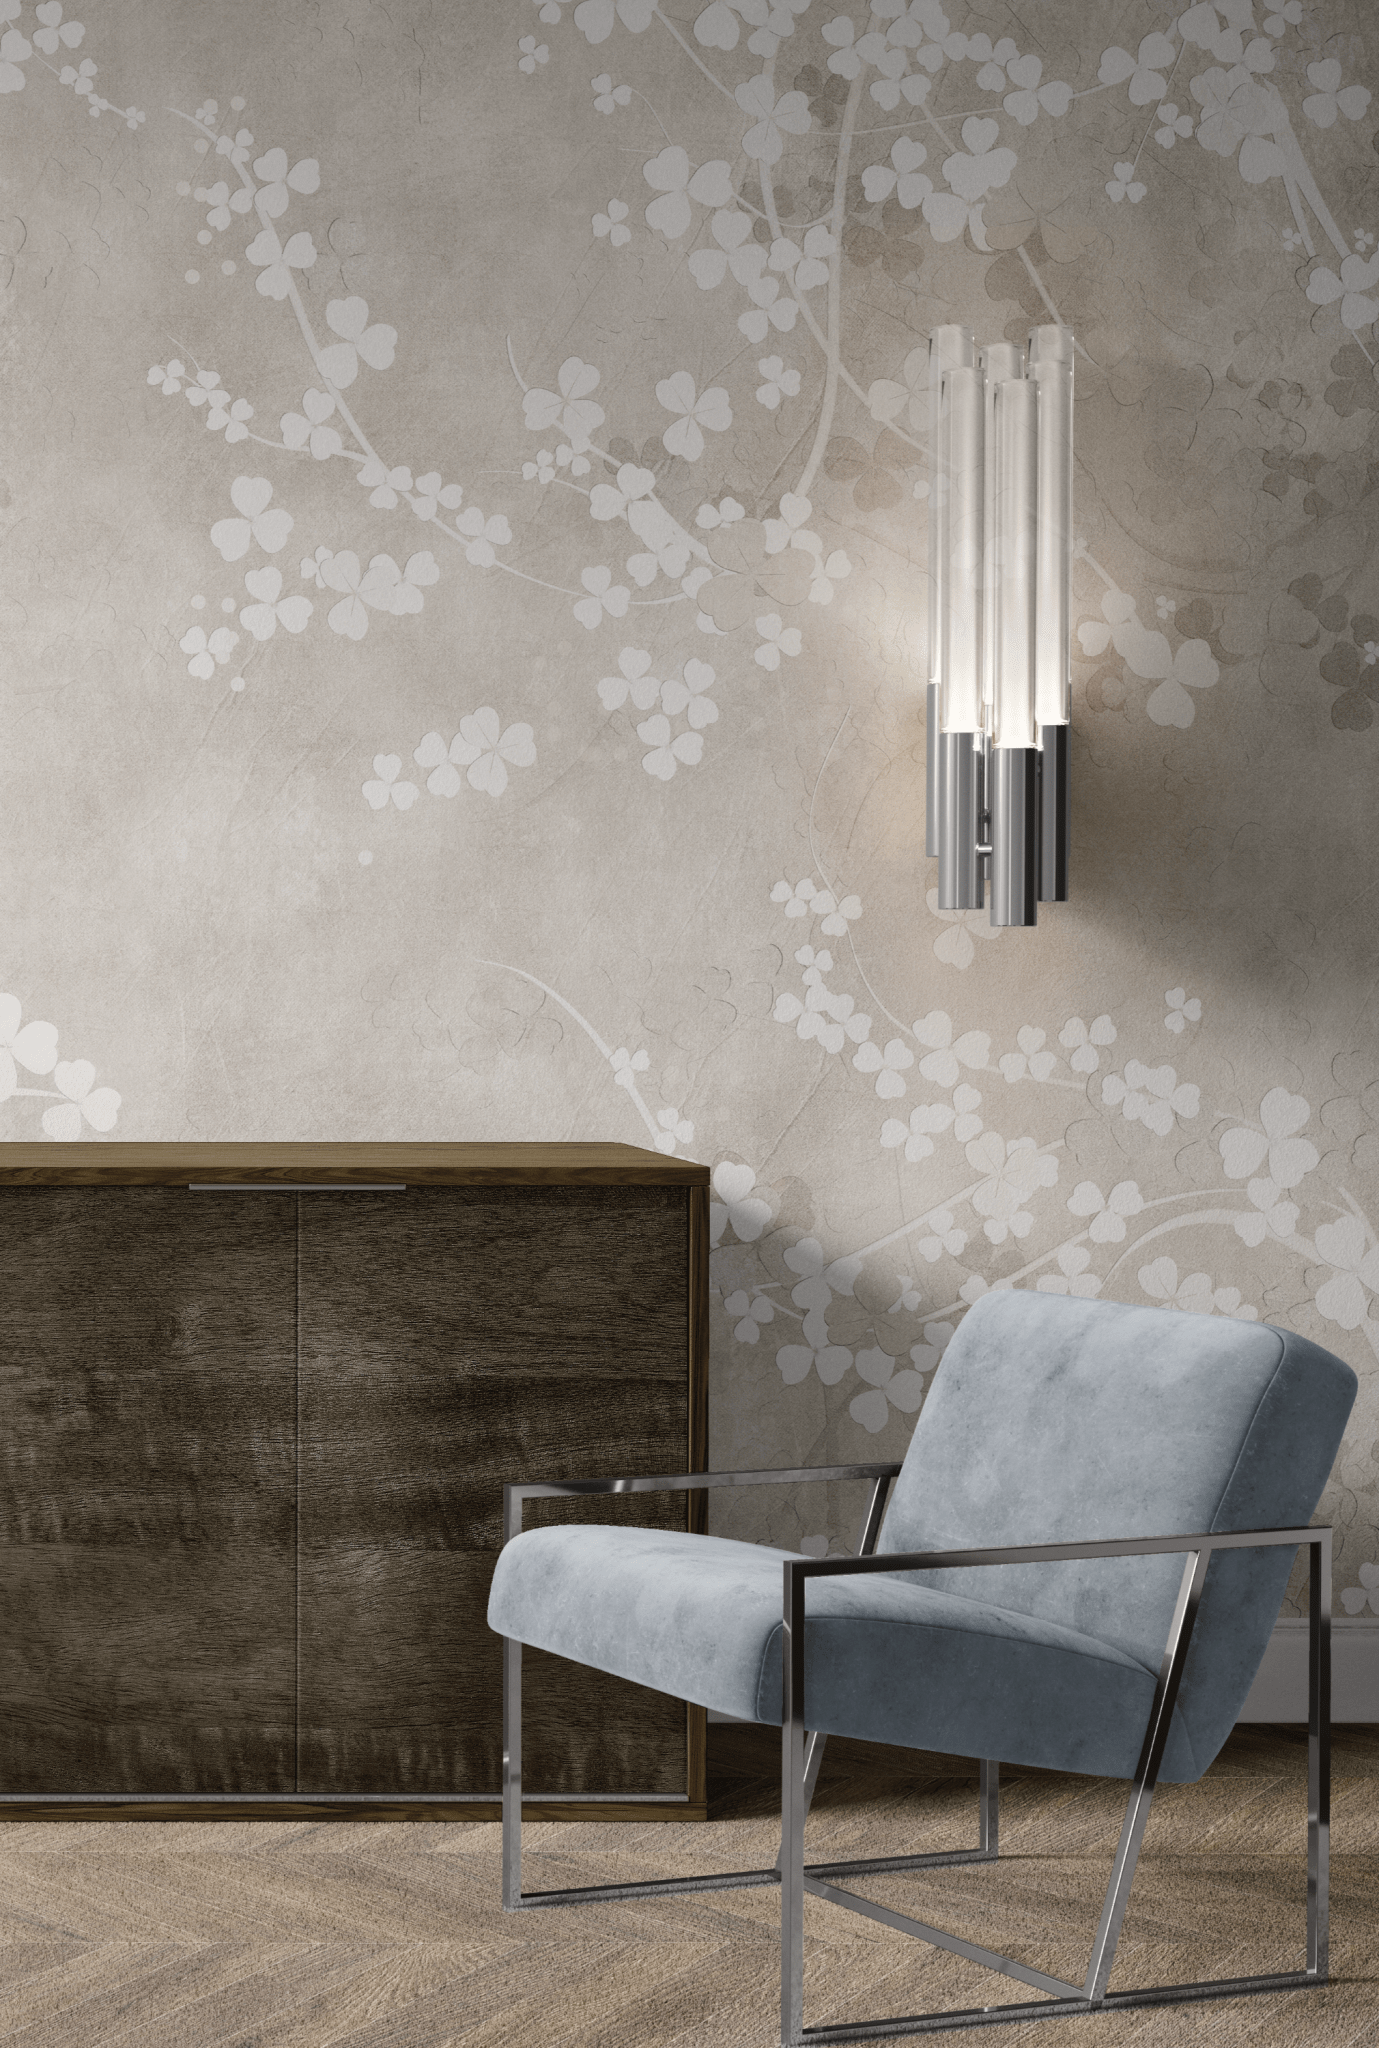 A contemporary room with a neutral beige fresco wall mural featuring a floral design, paired with a sleek blue armchair and a modern vertical light fixture above a wooden cabinet.